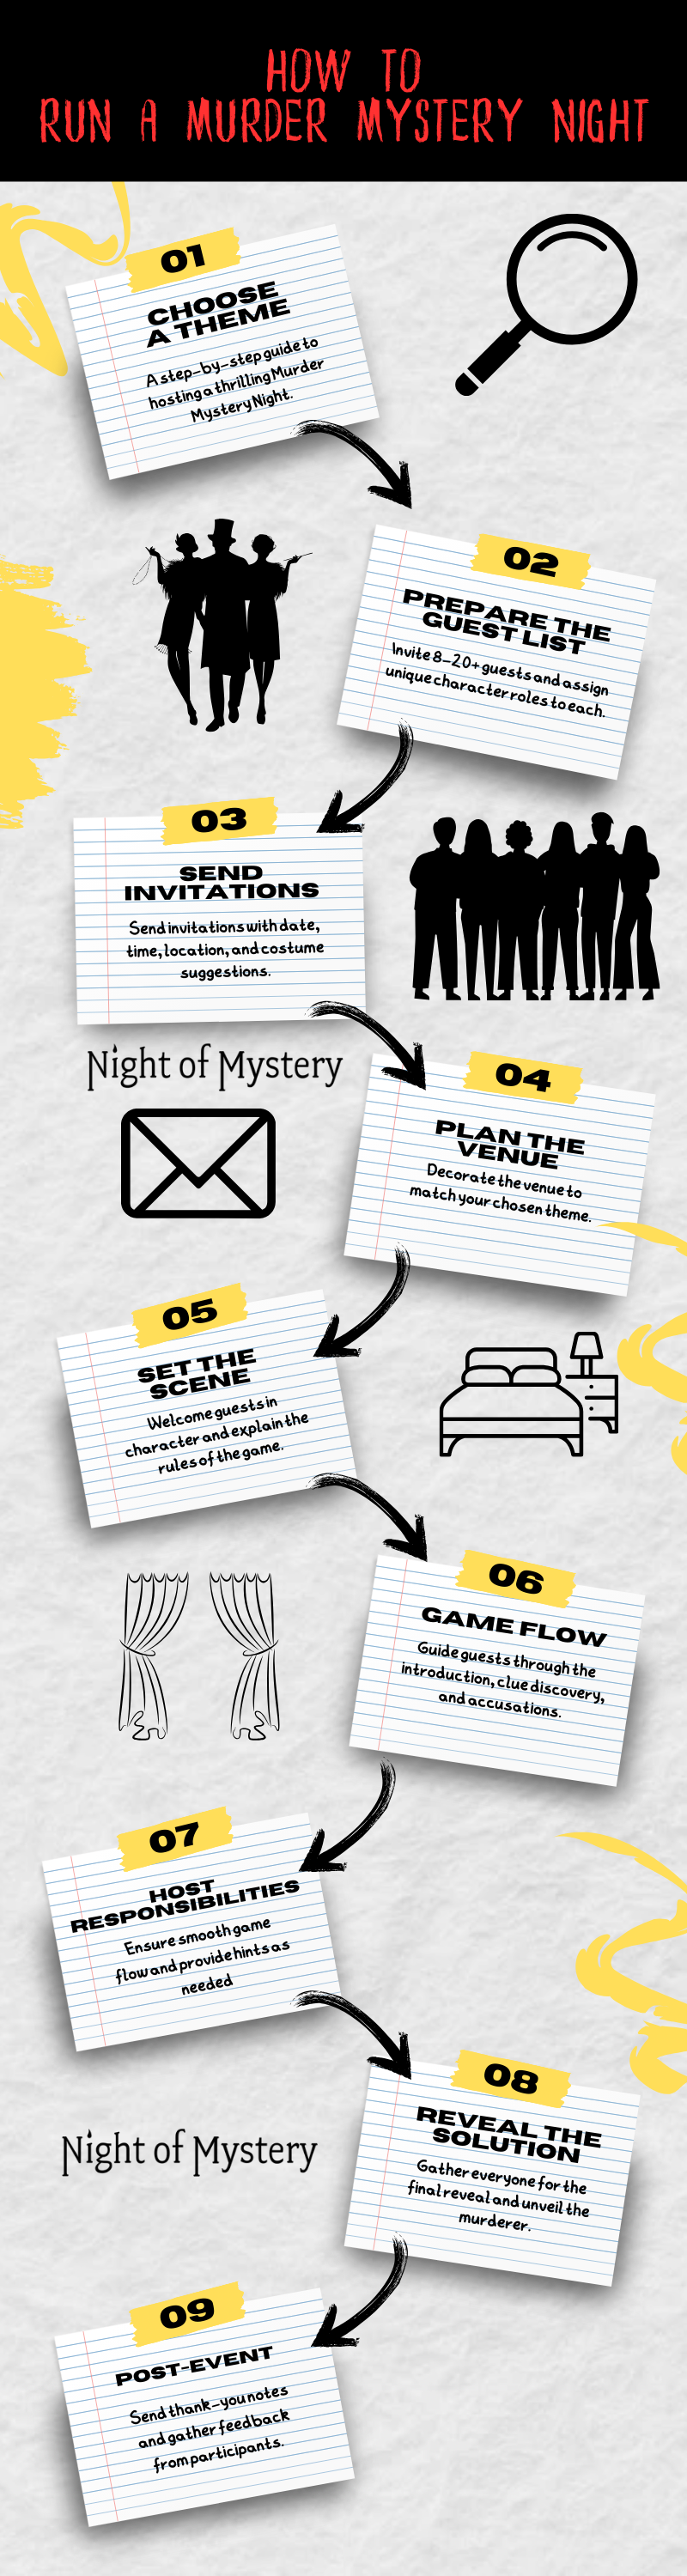 How to Host a Murder Mystery Party | Murder Mystery Party Ideas